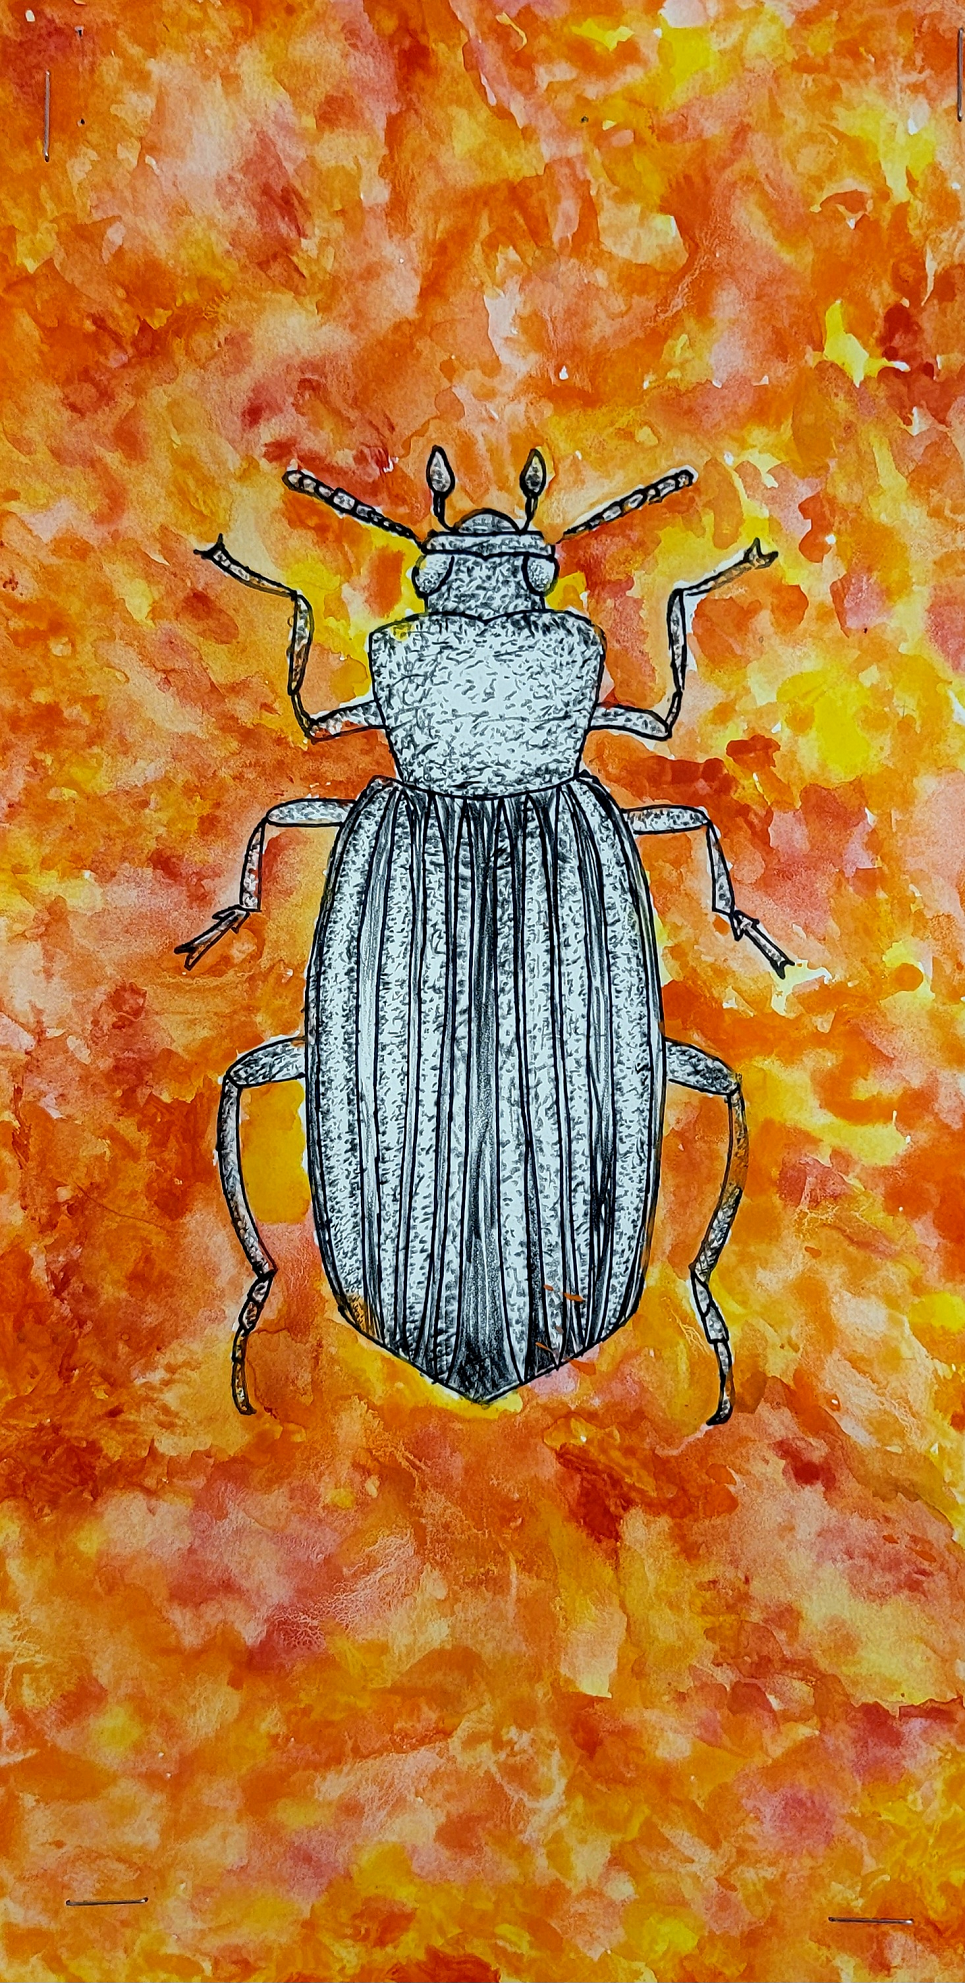 Insects inspired by Albrecht Durer